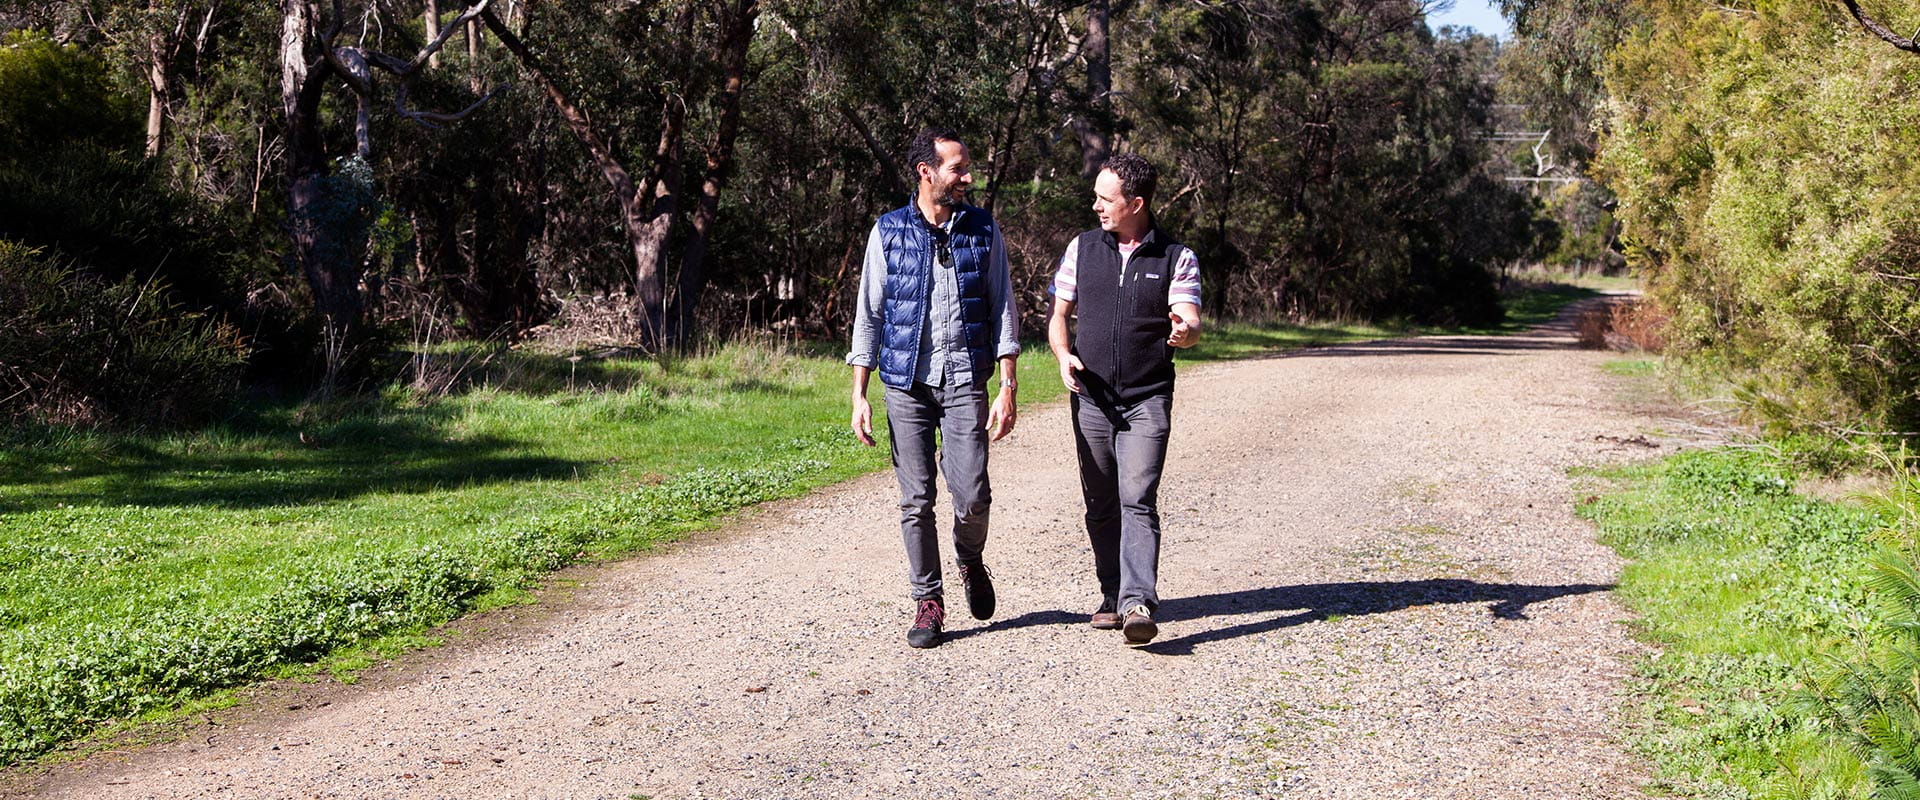 Two people are invested in conversation as they walk along a gravel path